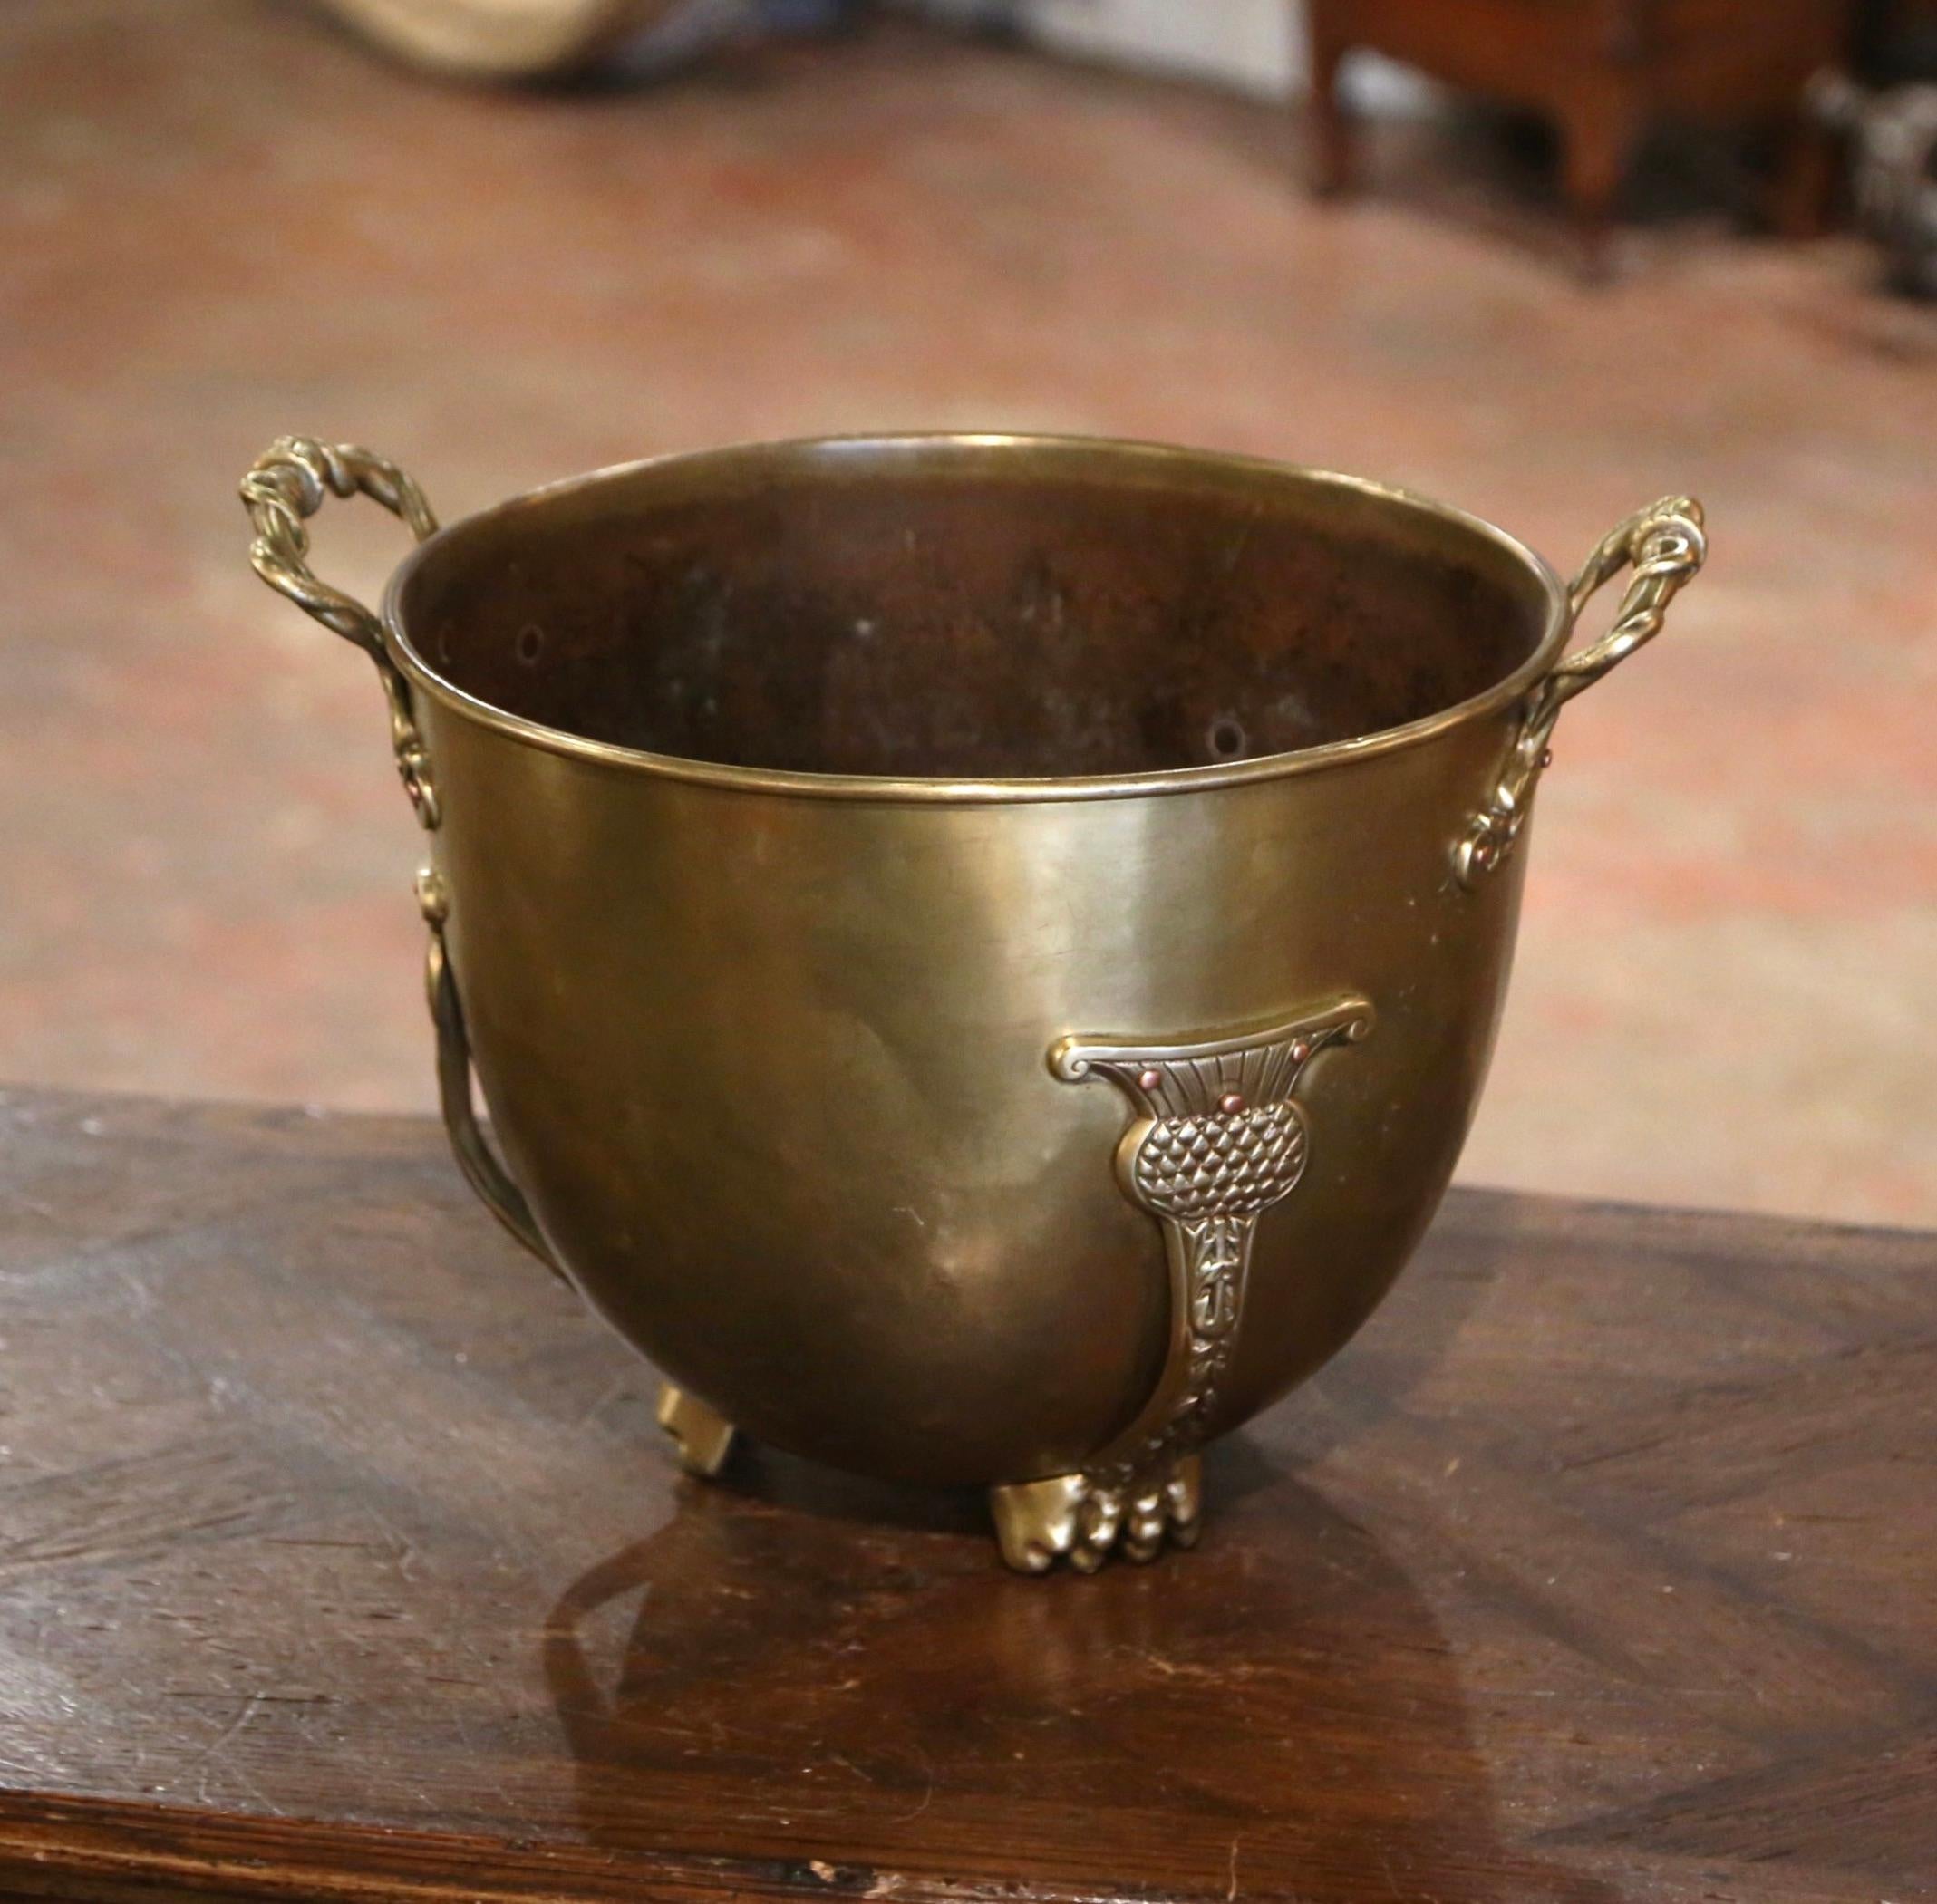 Bring an authentic French countryside touch to your kitchen with this large antique cache pot. Crafted in Normandy, France circa 1870, and round in shape, the bucket stands on small paw feet and is dressed with intricate side handles handle attached